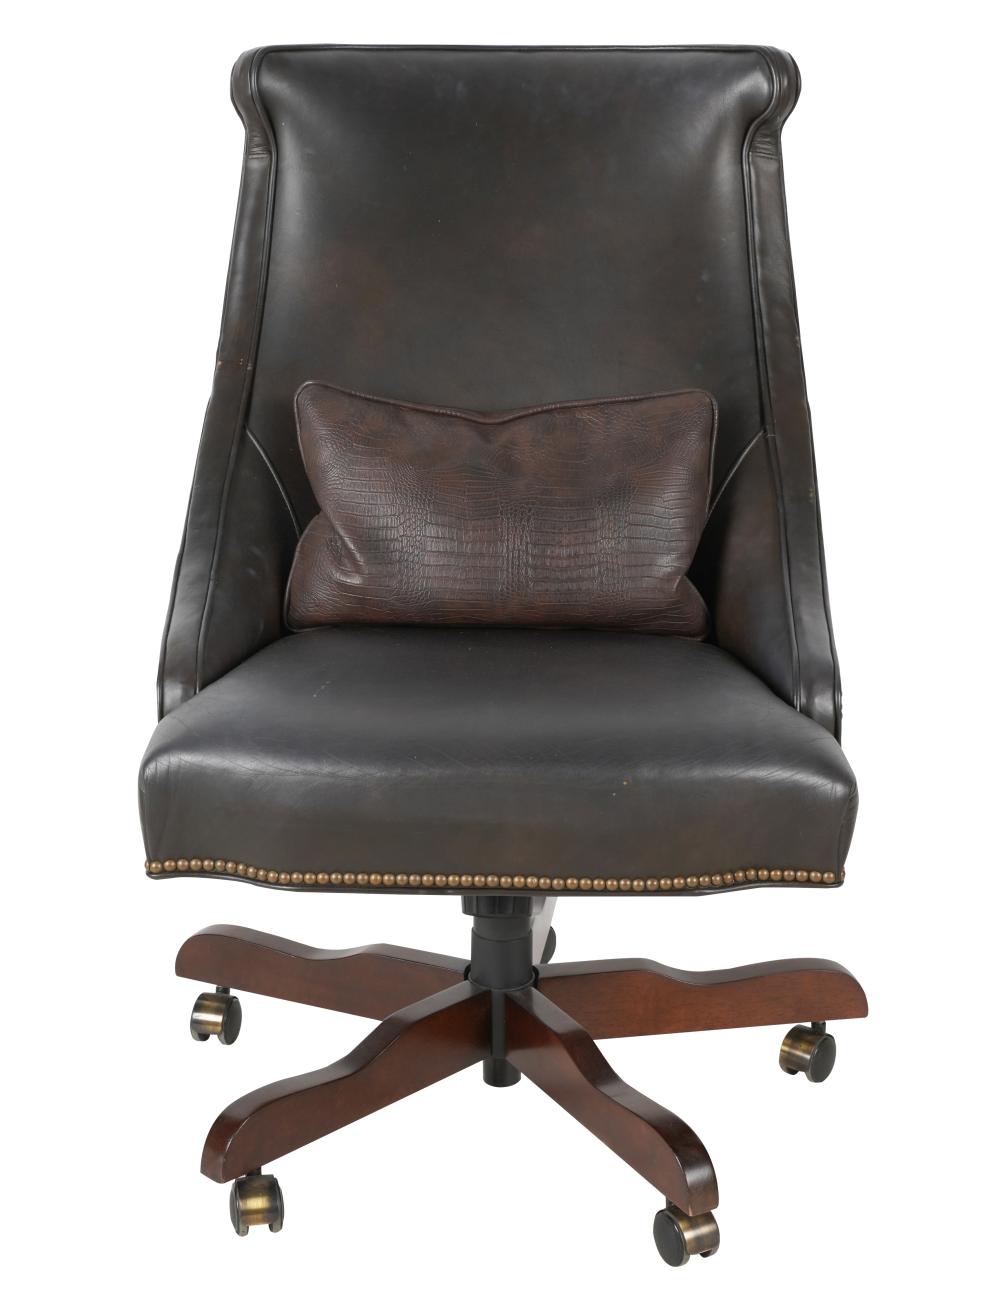 BROWN LEATHER SWIVEL OFFICE CHAIRadjustable